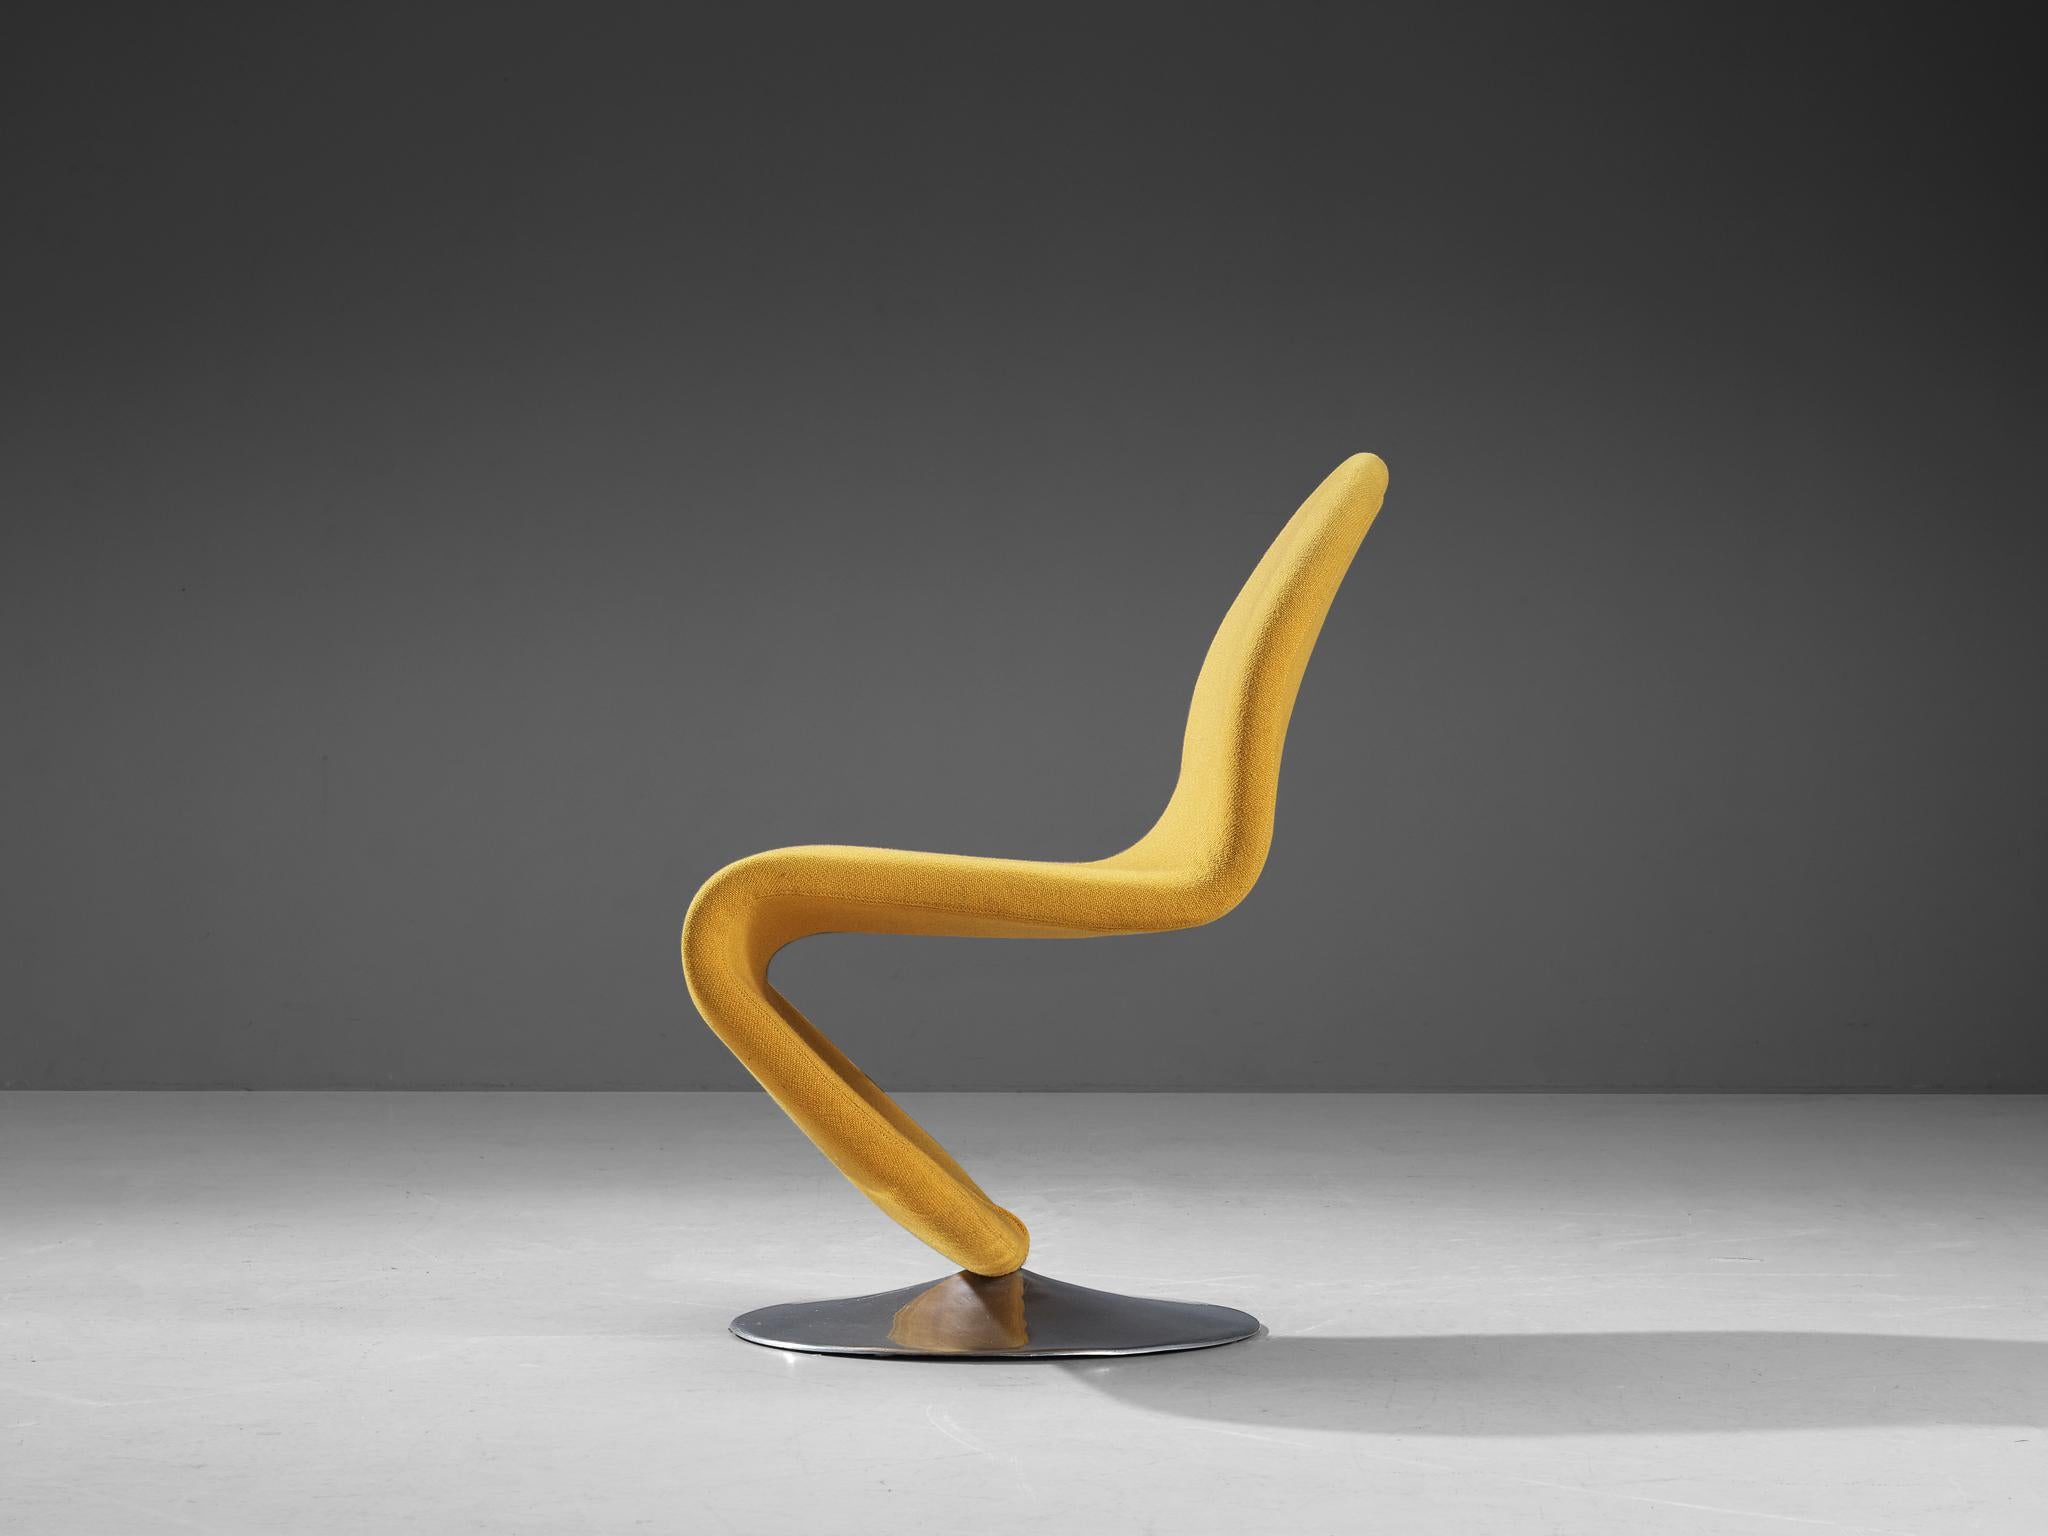 Verner Panton for Fritz Hansen, chair 'system 1-2-3', metal, fabric, Denmark, designed in 1973

Chair model 'Chair A' from the '1-2-3' series of Danish designer Verner Panton. Panton is known for his organic and frivolous designs. The '1-2-3